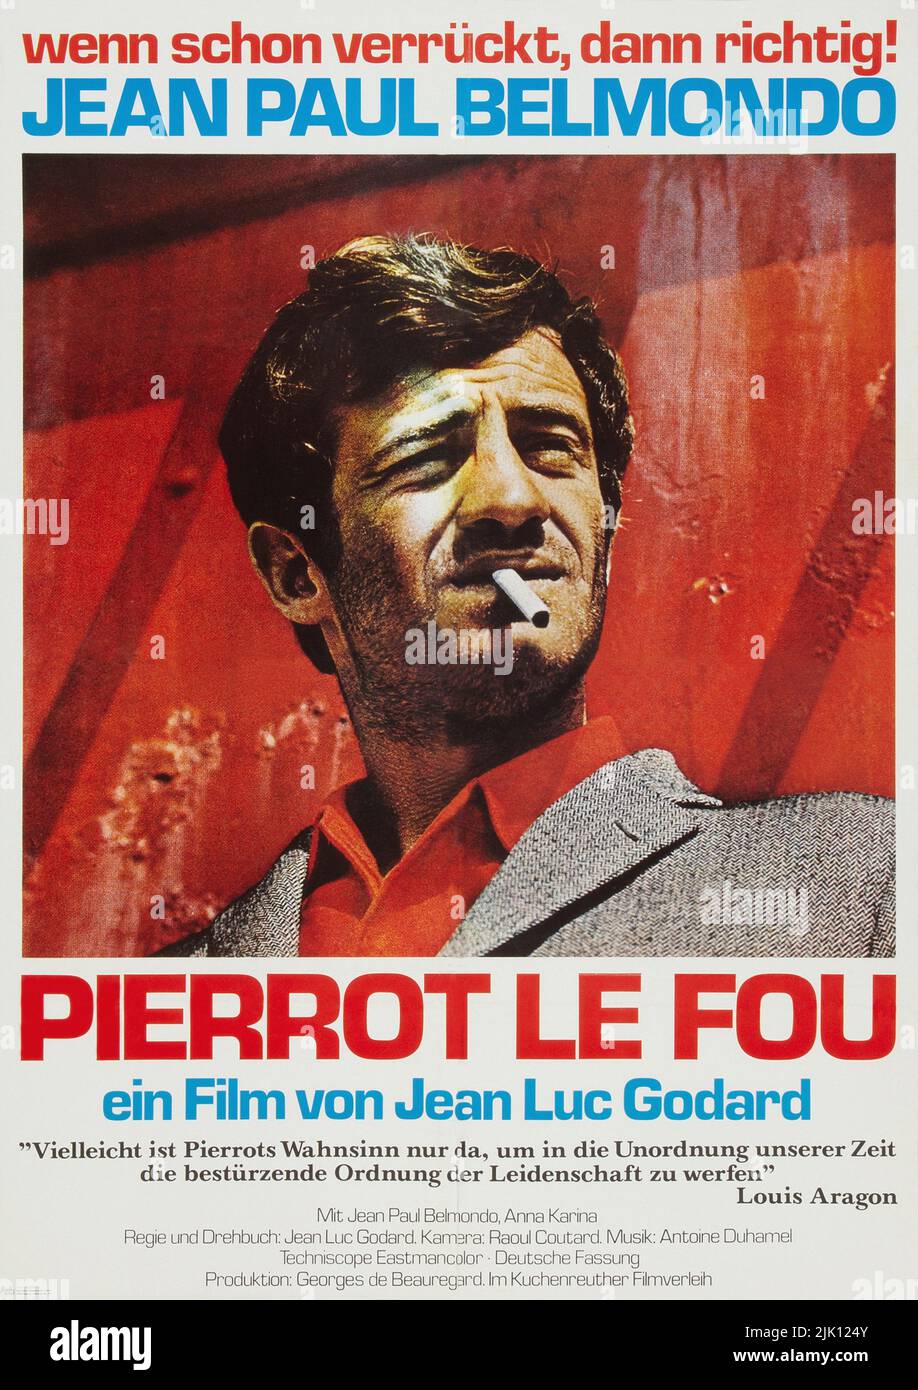 Pierrot le Fou - Film Poster  - 1965 French New Wave film directed by Jean-Luc Godard, starring Jean-Paul Belmondo and Anna Karina Stock Photo